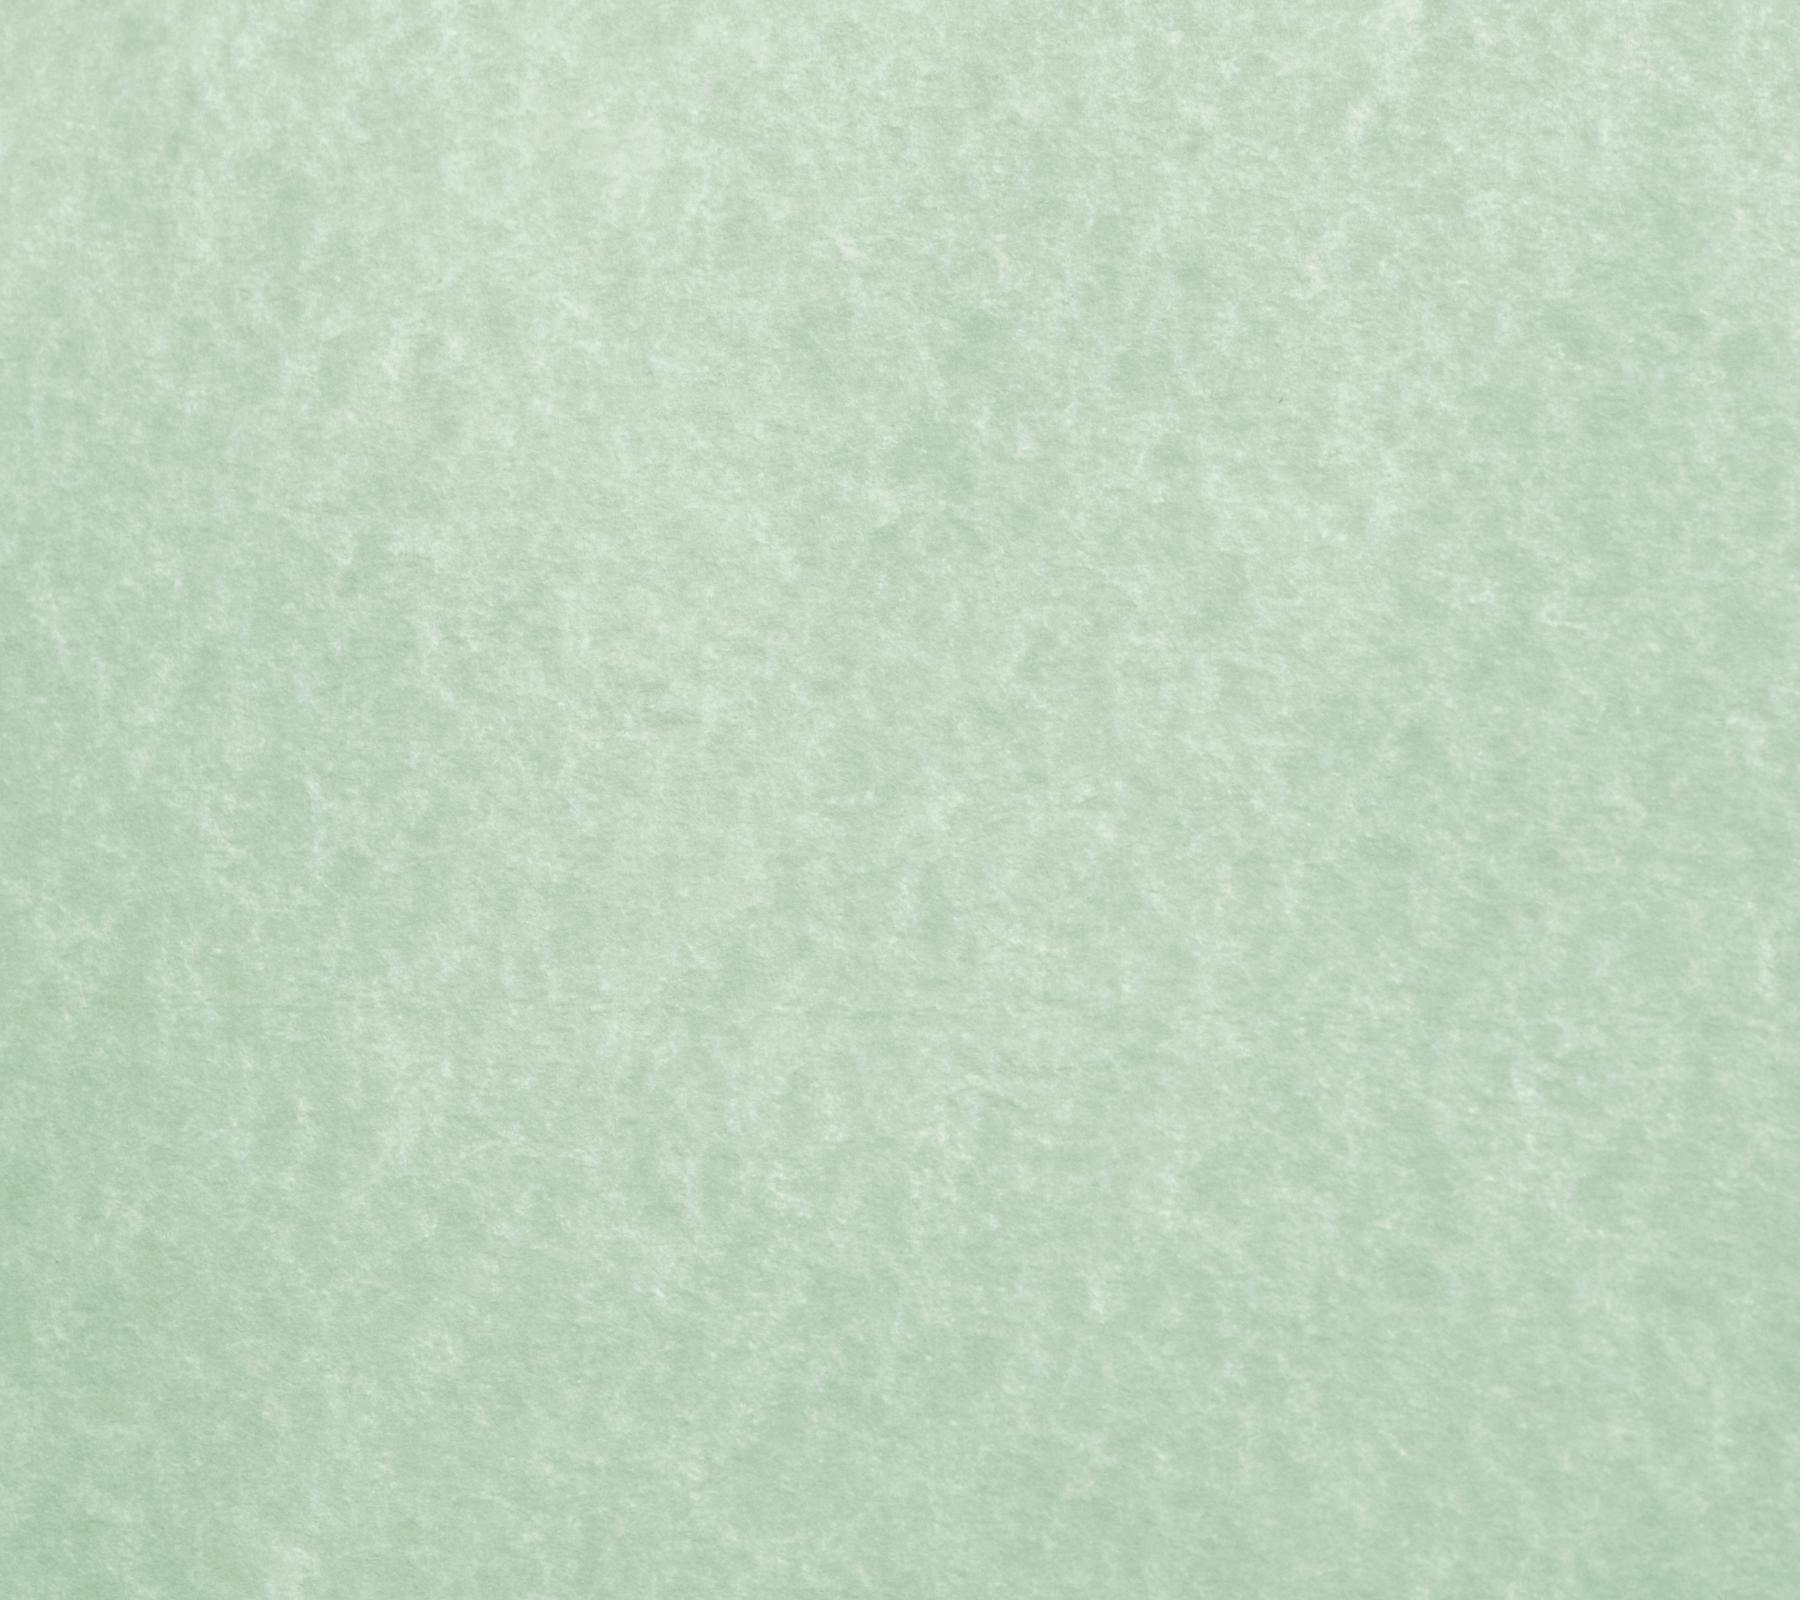 Sage Green Parchment Paper Background 1800x1600 Background Image